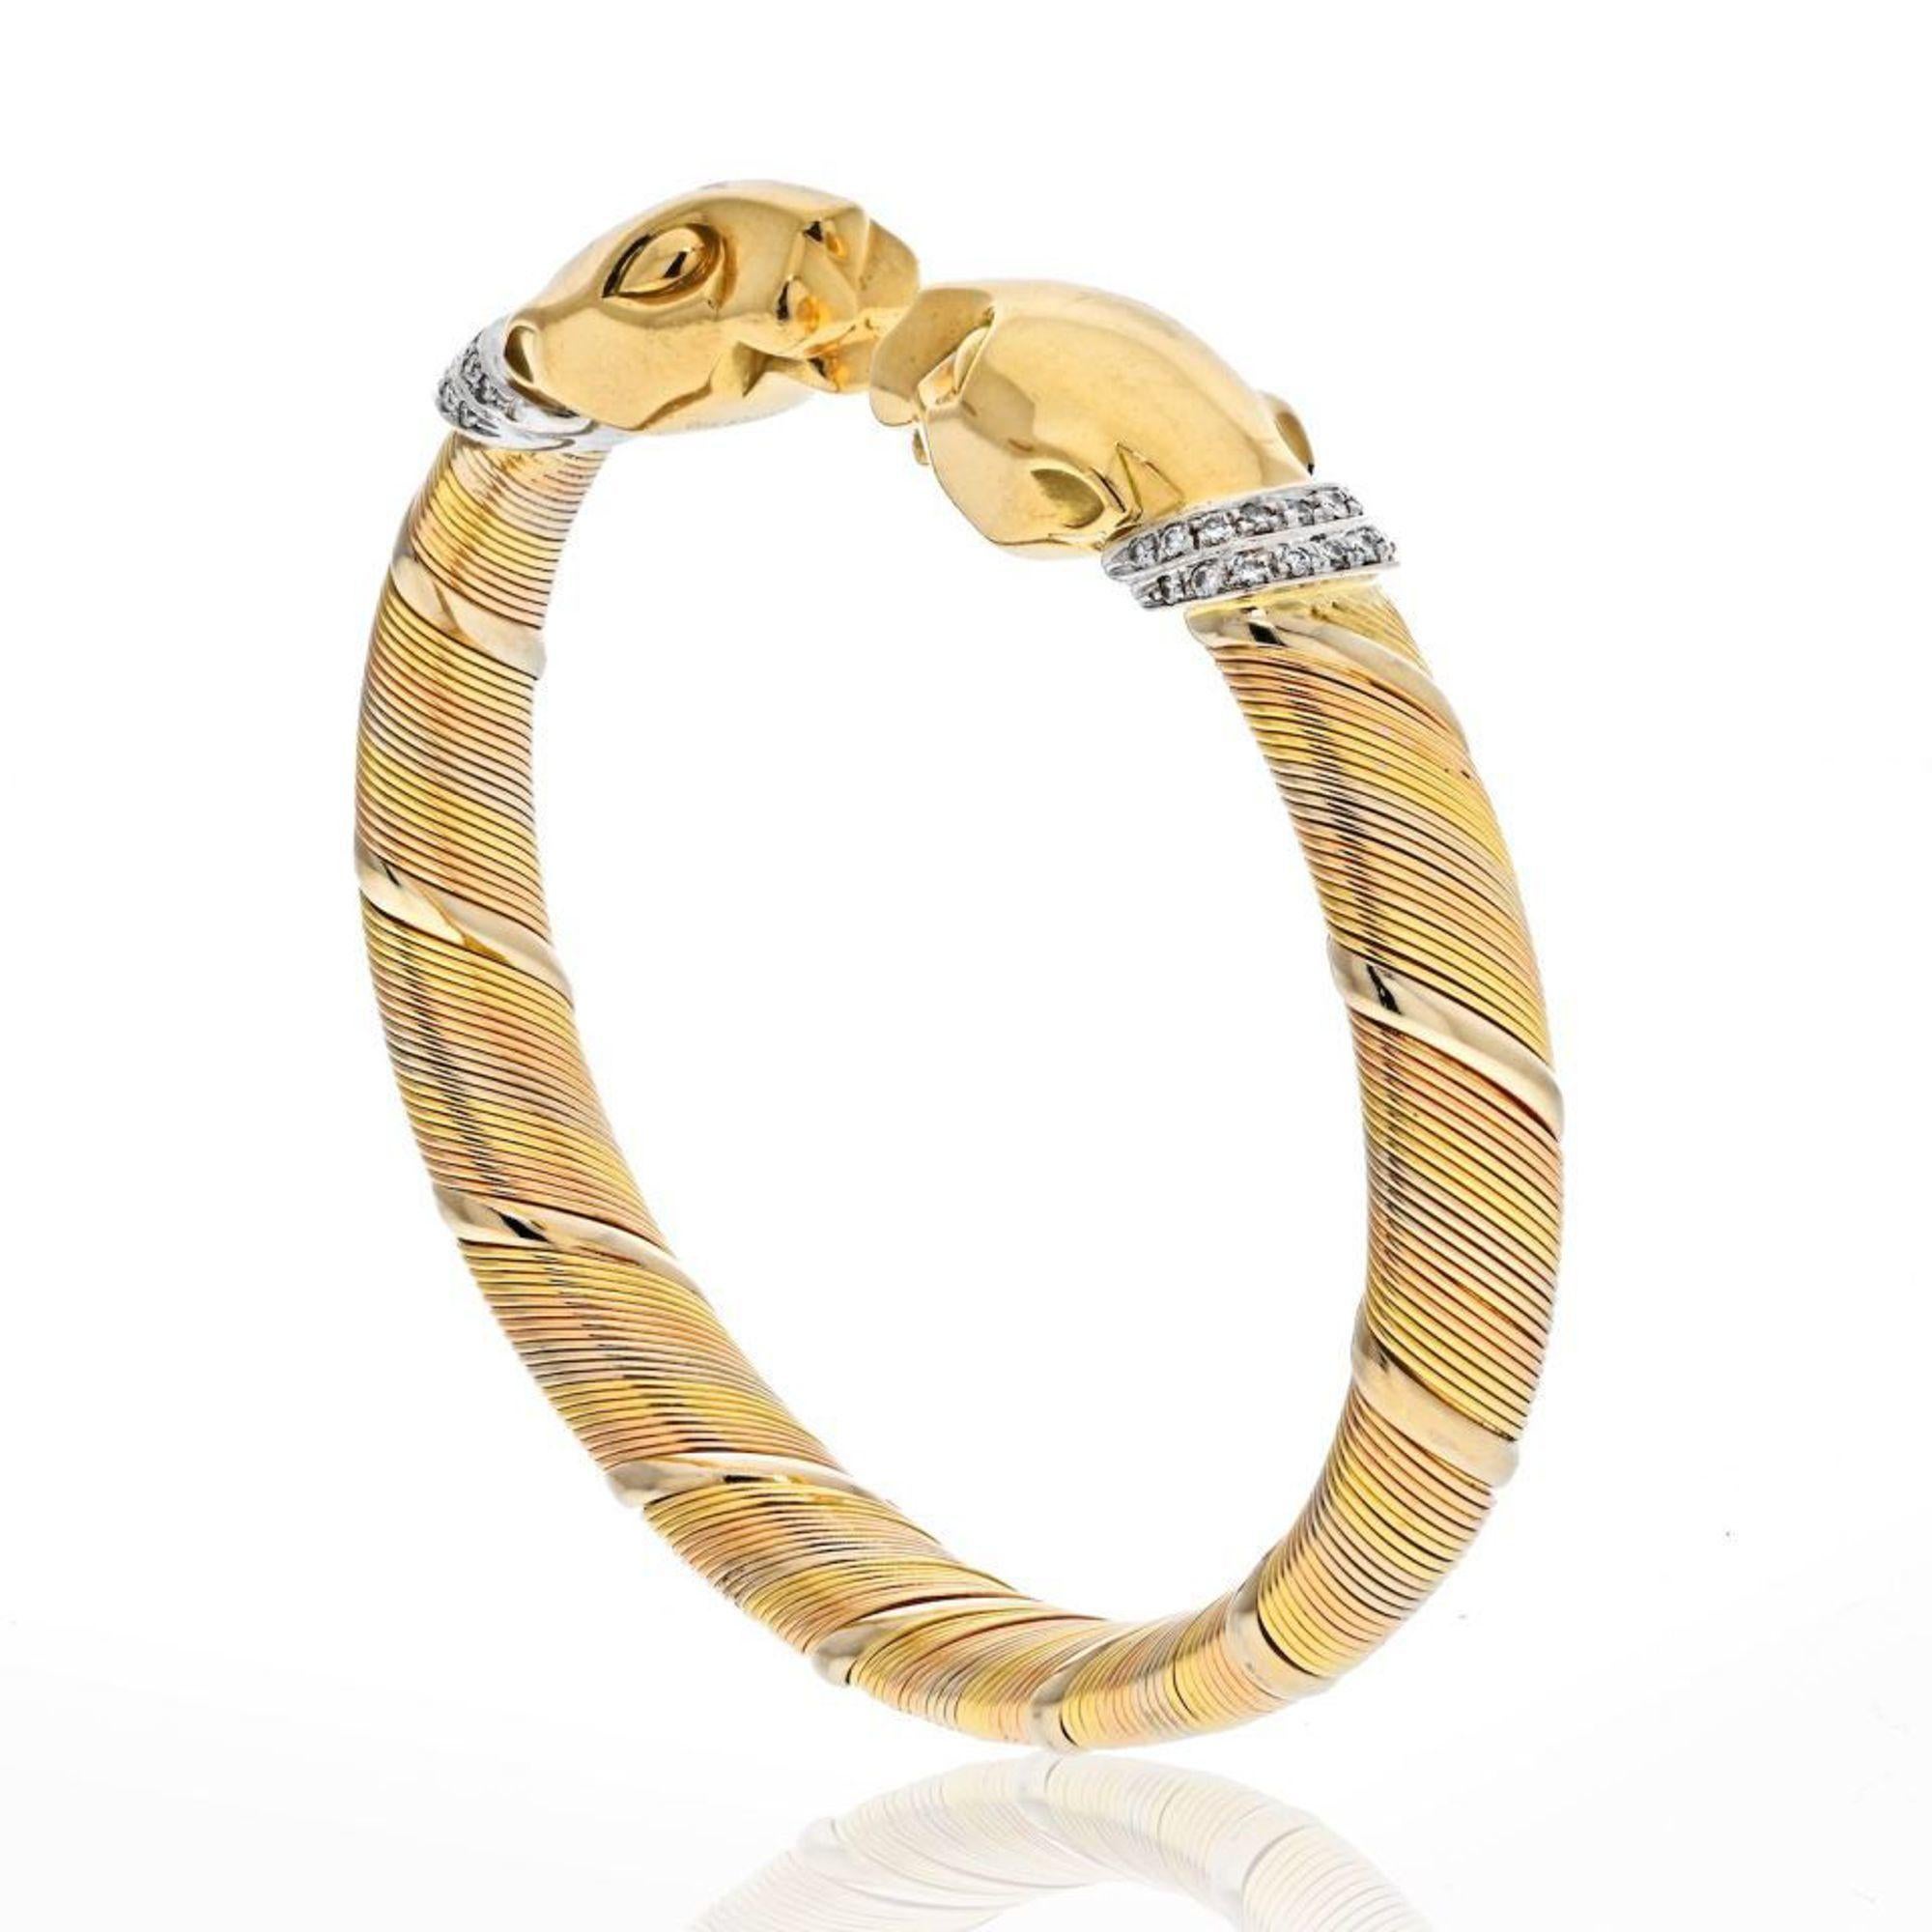 Rare vintage Panthere De Cartier (Cougar) bangle bracelet crafted in coiled tri-color 18k gold. This bracelet features two solid yellow gold Panthere heads at each end. The bangle is a 'half flexible' bracelet which makes it easy to take on and off,